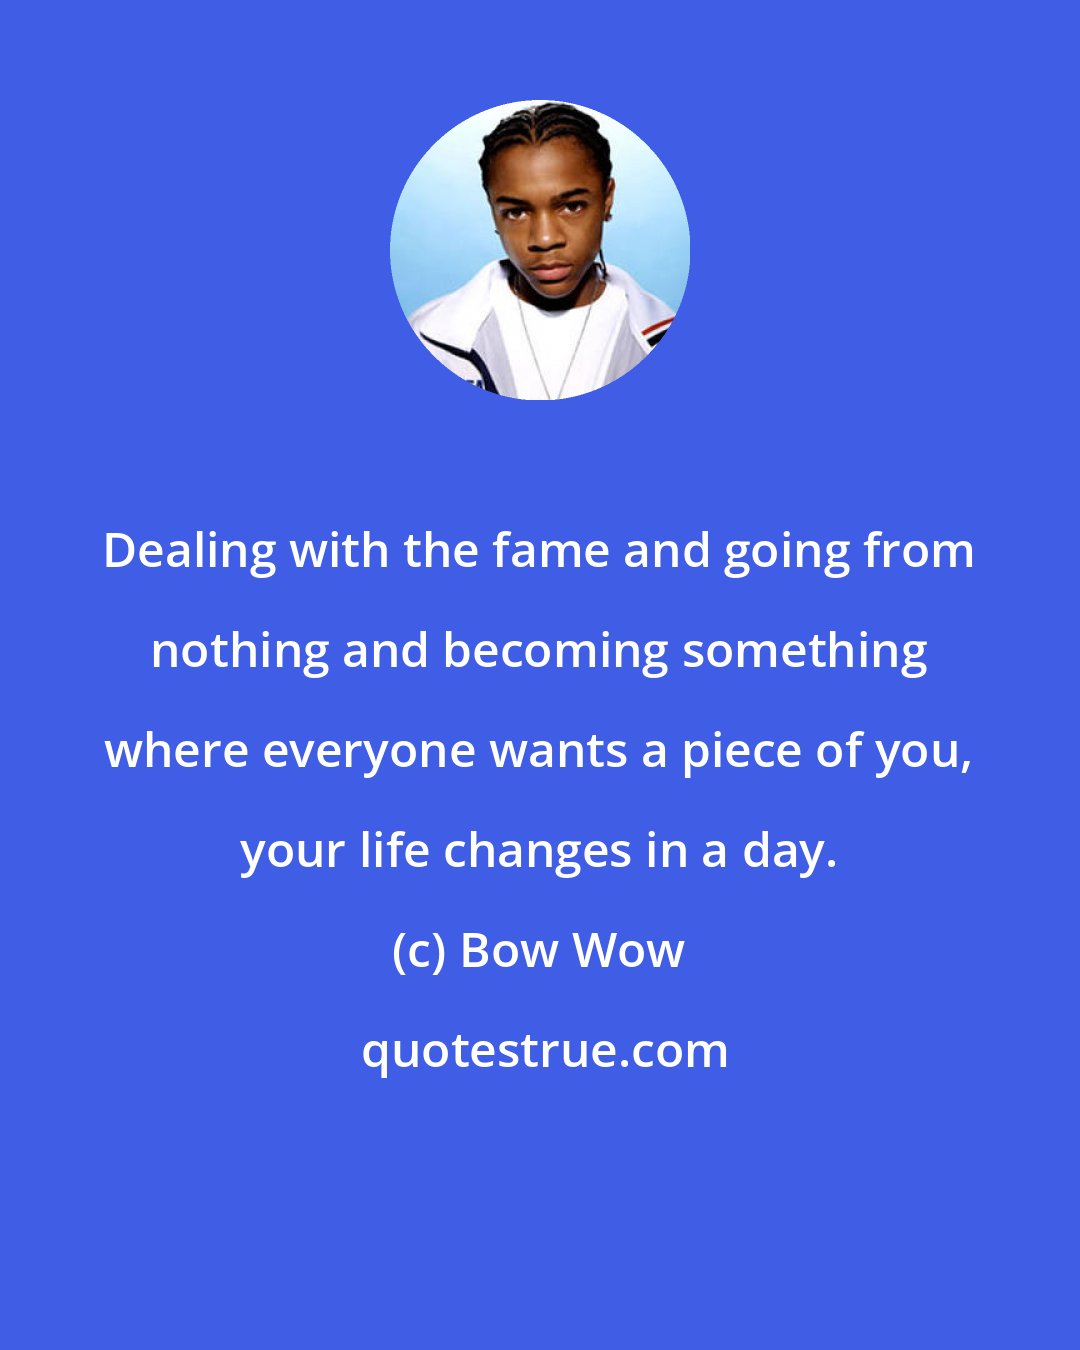 Bow Wow: Dealing with the fame and going from nothing and becoming something where everyone wants a piece of you, your life changes in a day.